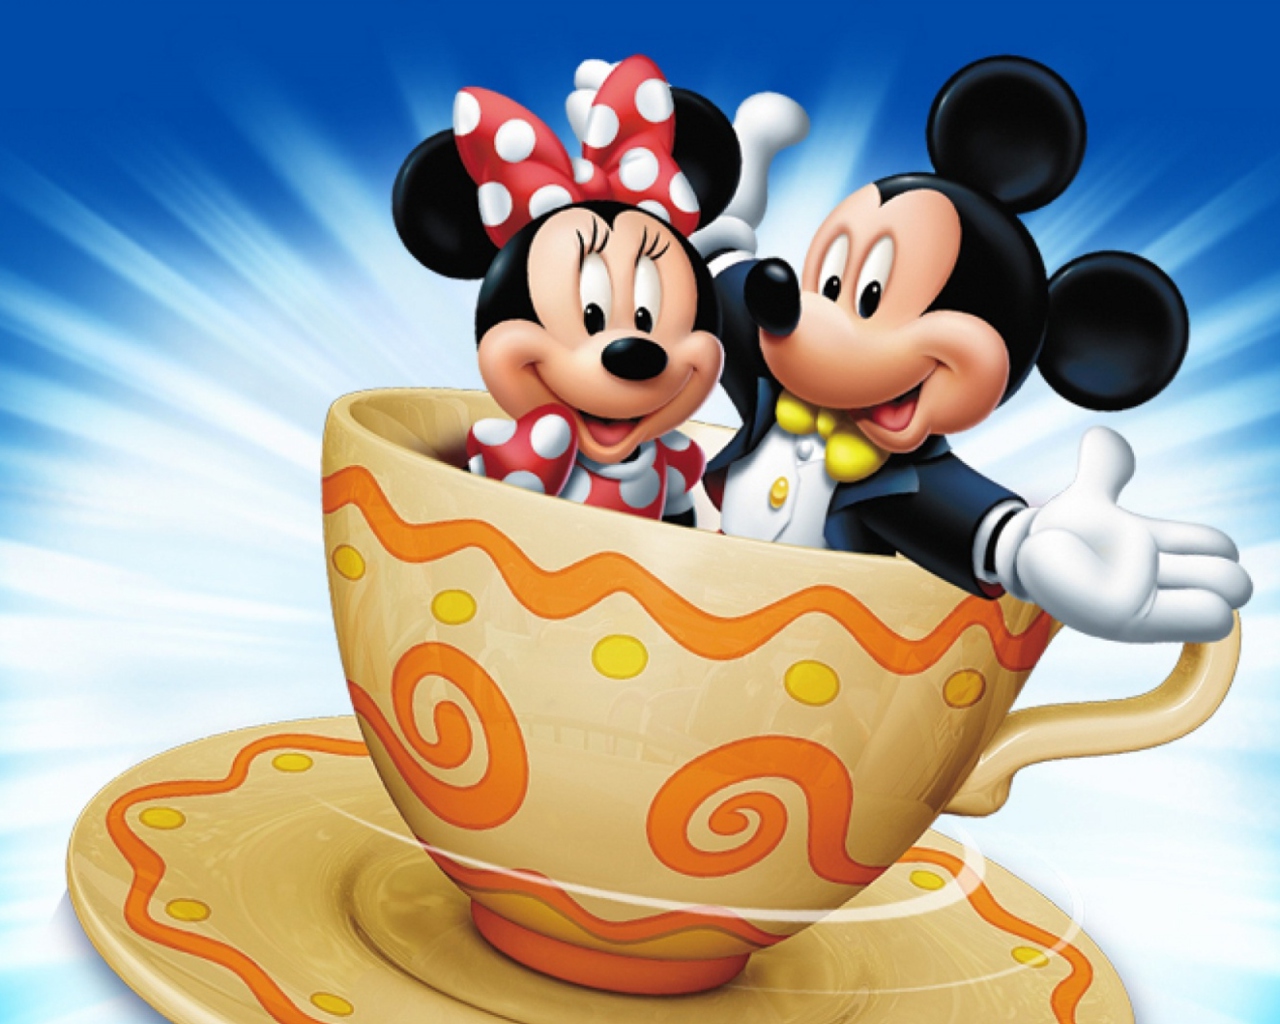 Mickey And Minnie Mouse In Cup wallpaper 1280x1024